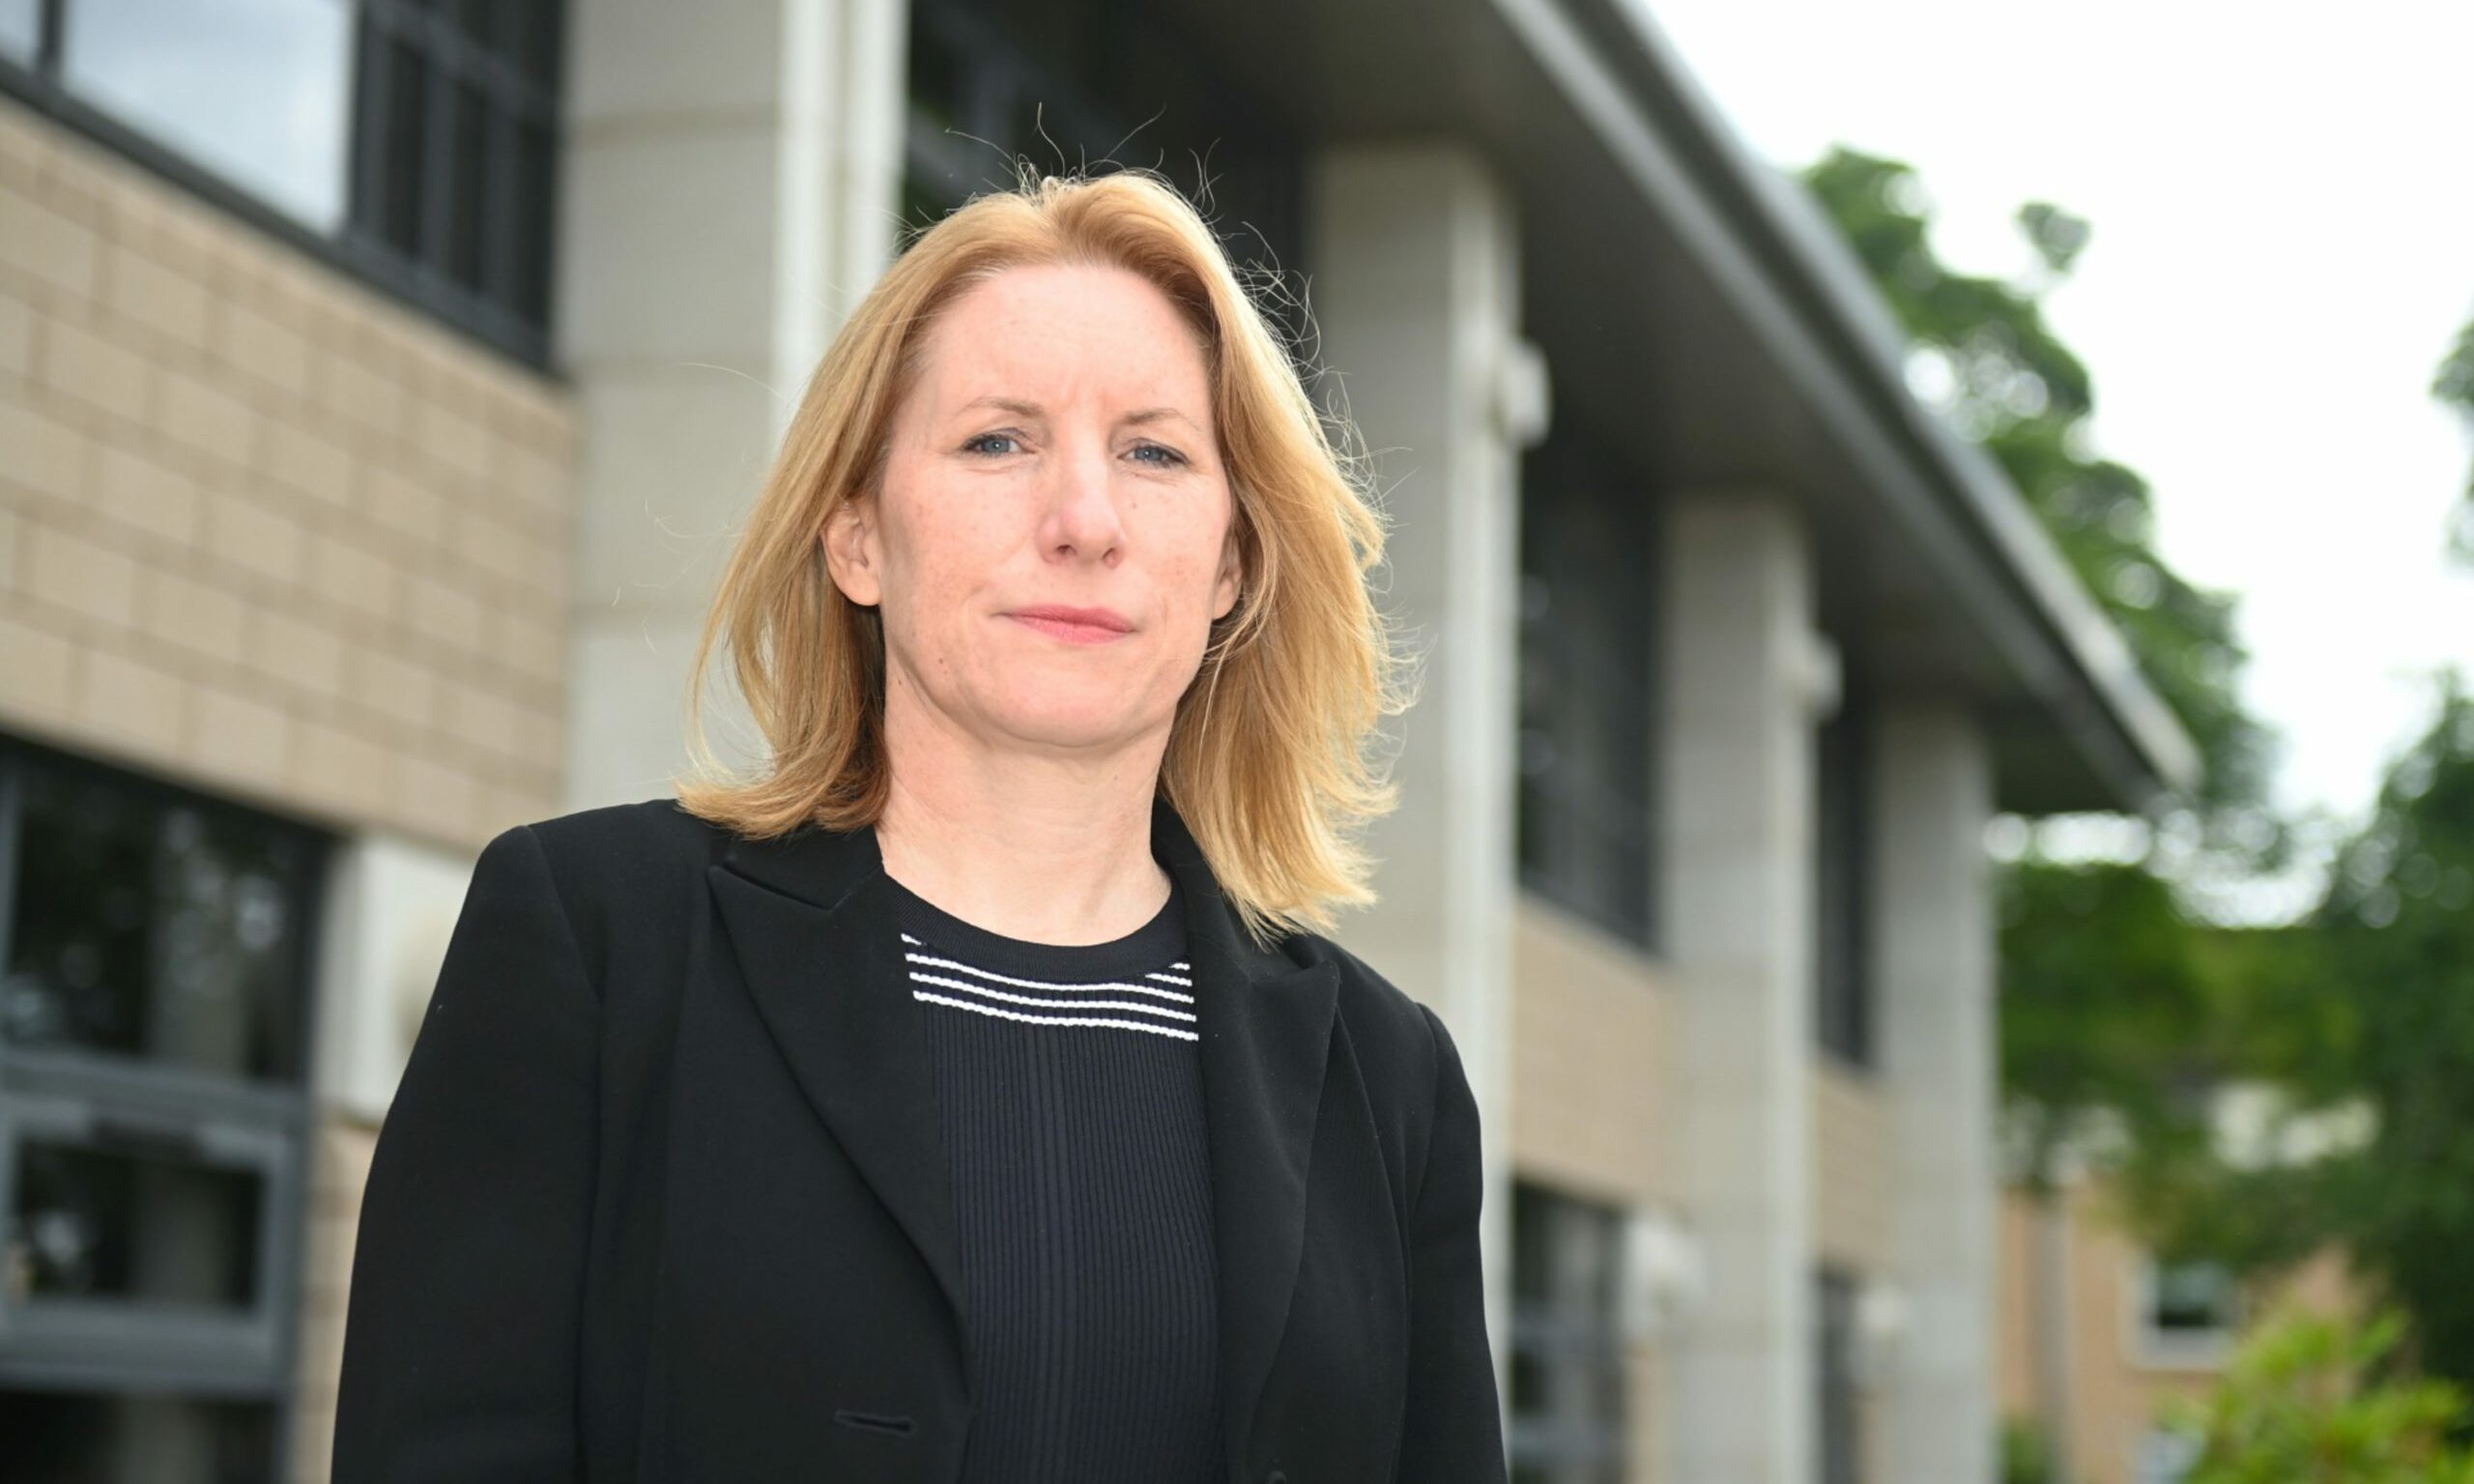 NHS Grampian chief executive Caroline Hiscox says the future plan could require "difficult choices".